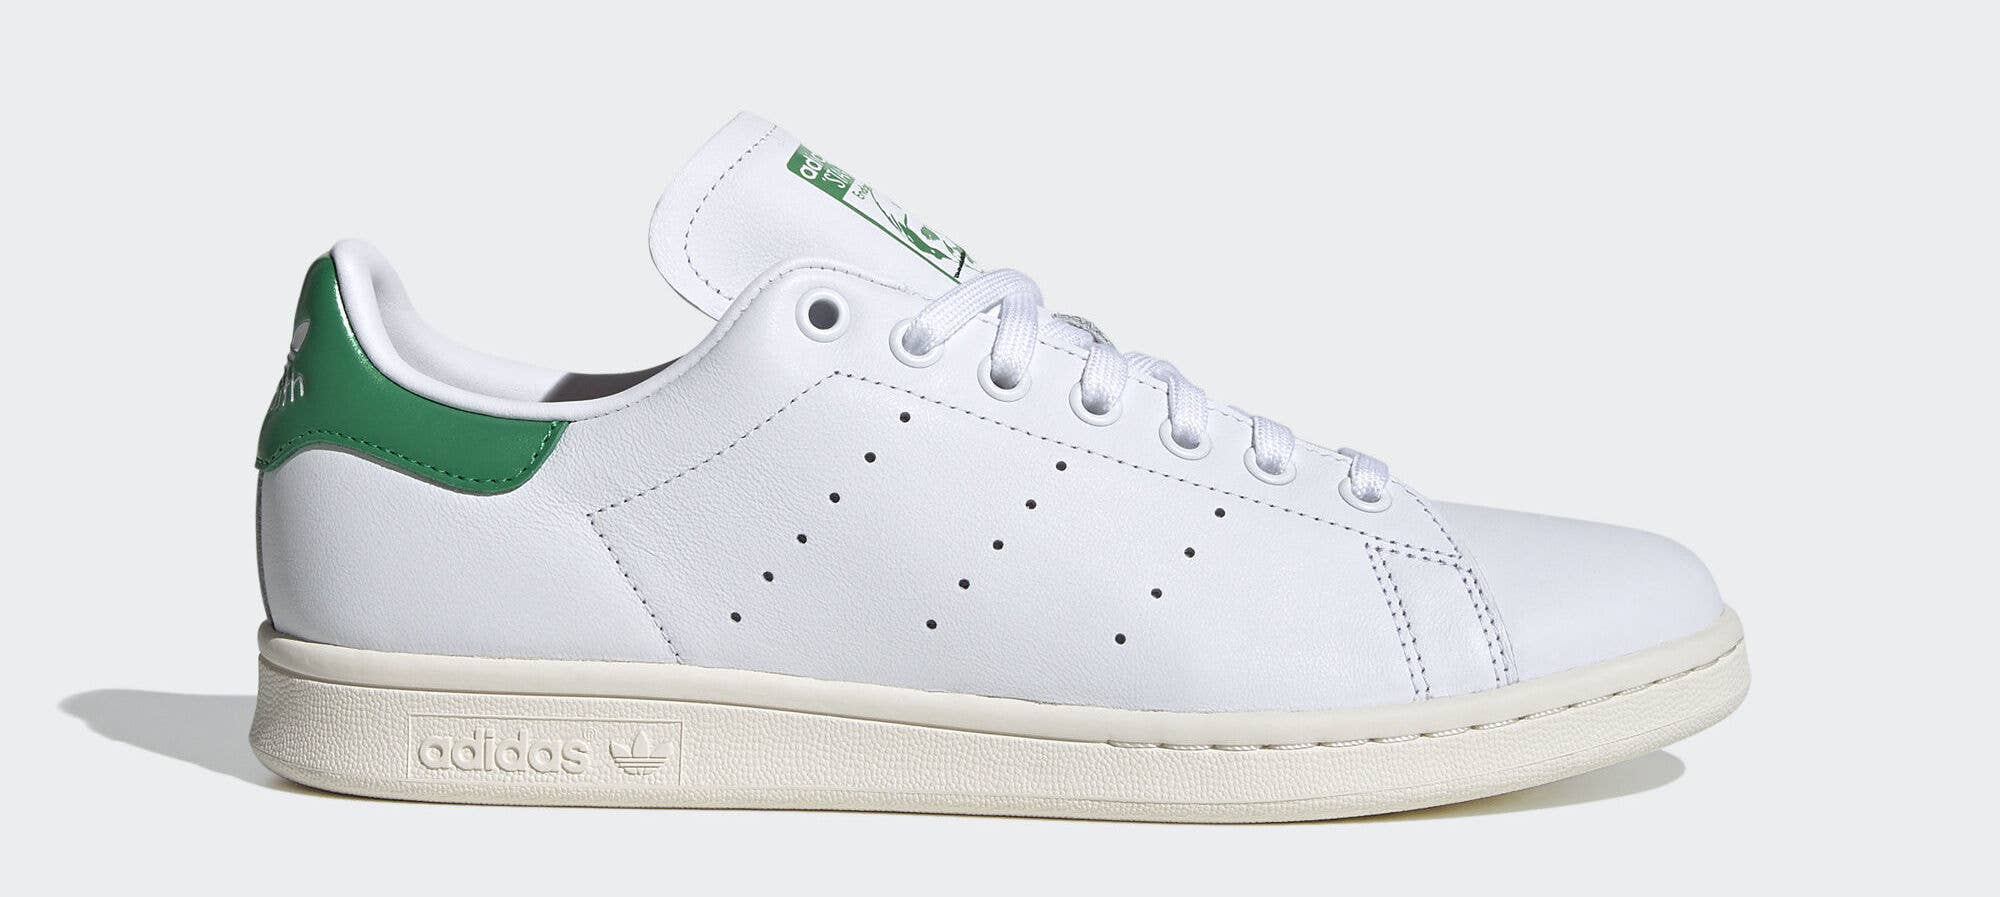 Adidas Stan Smith 'Valentine's Day' (Green) EH1735 (Lateral)